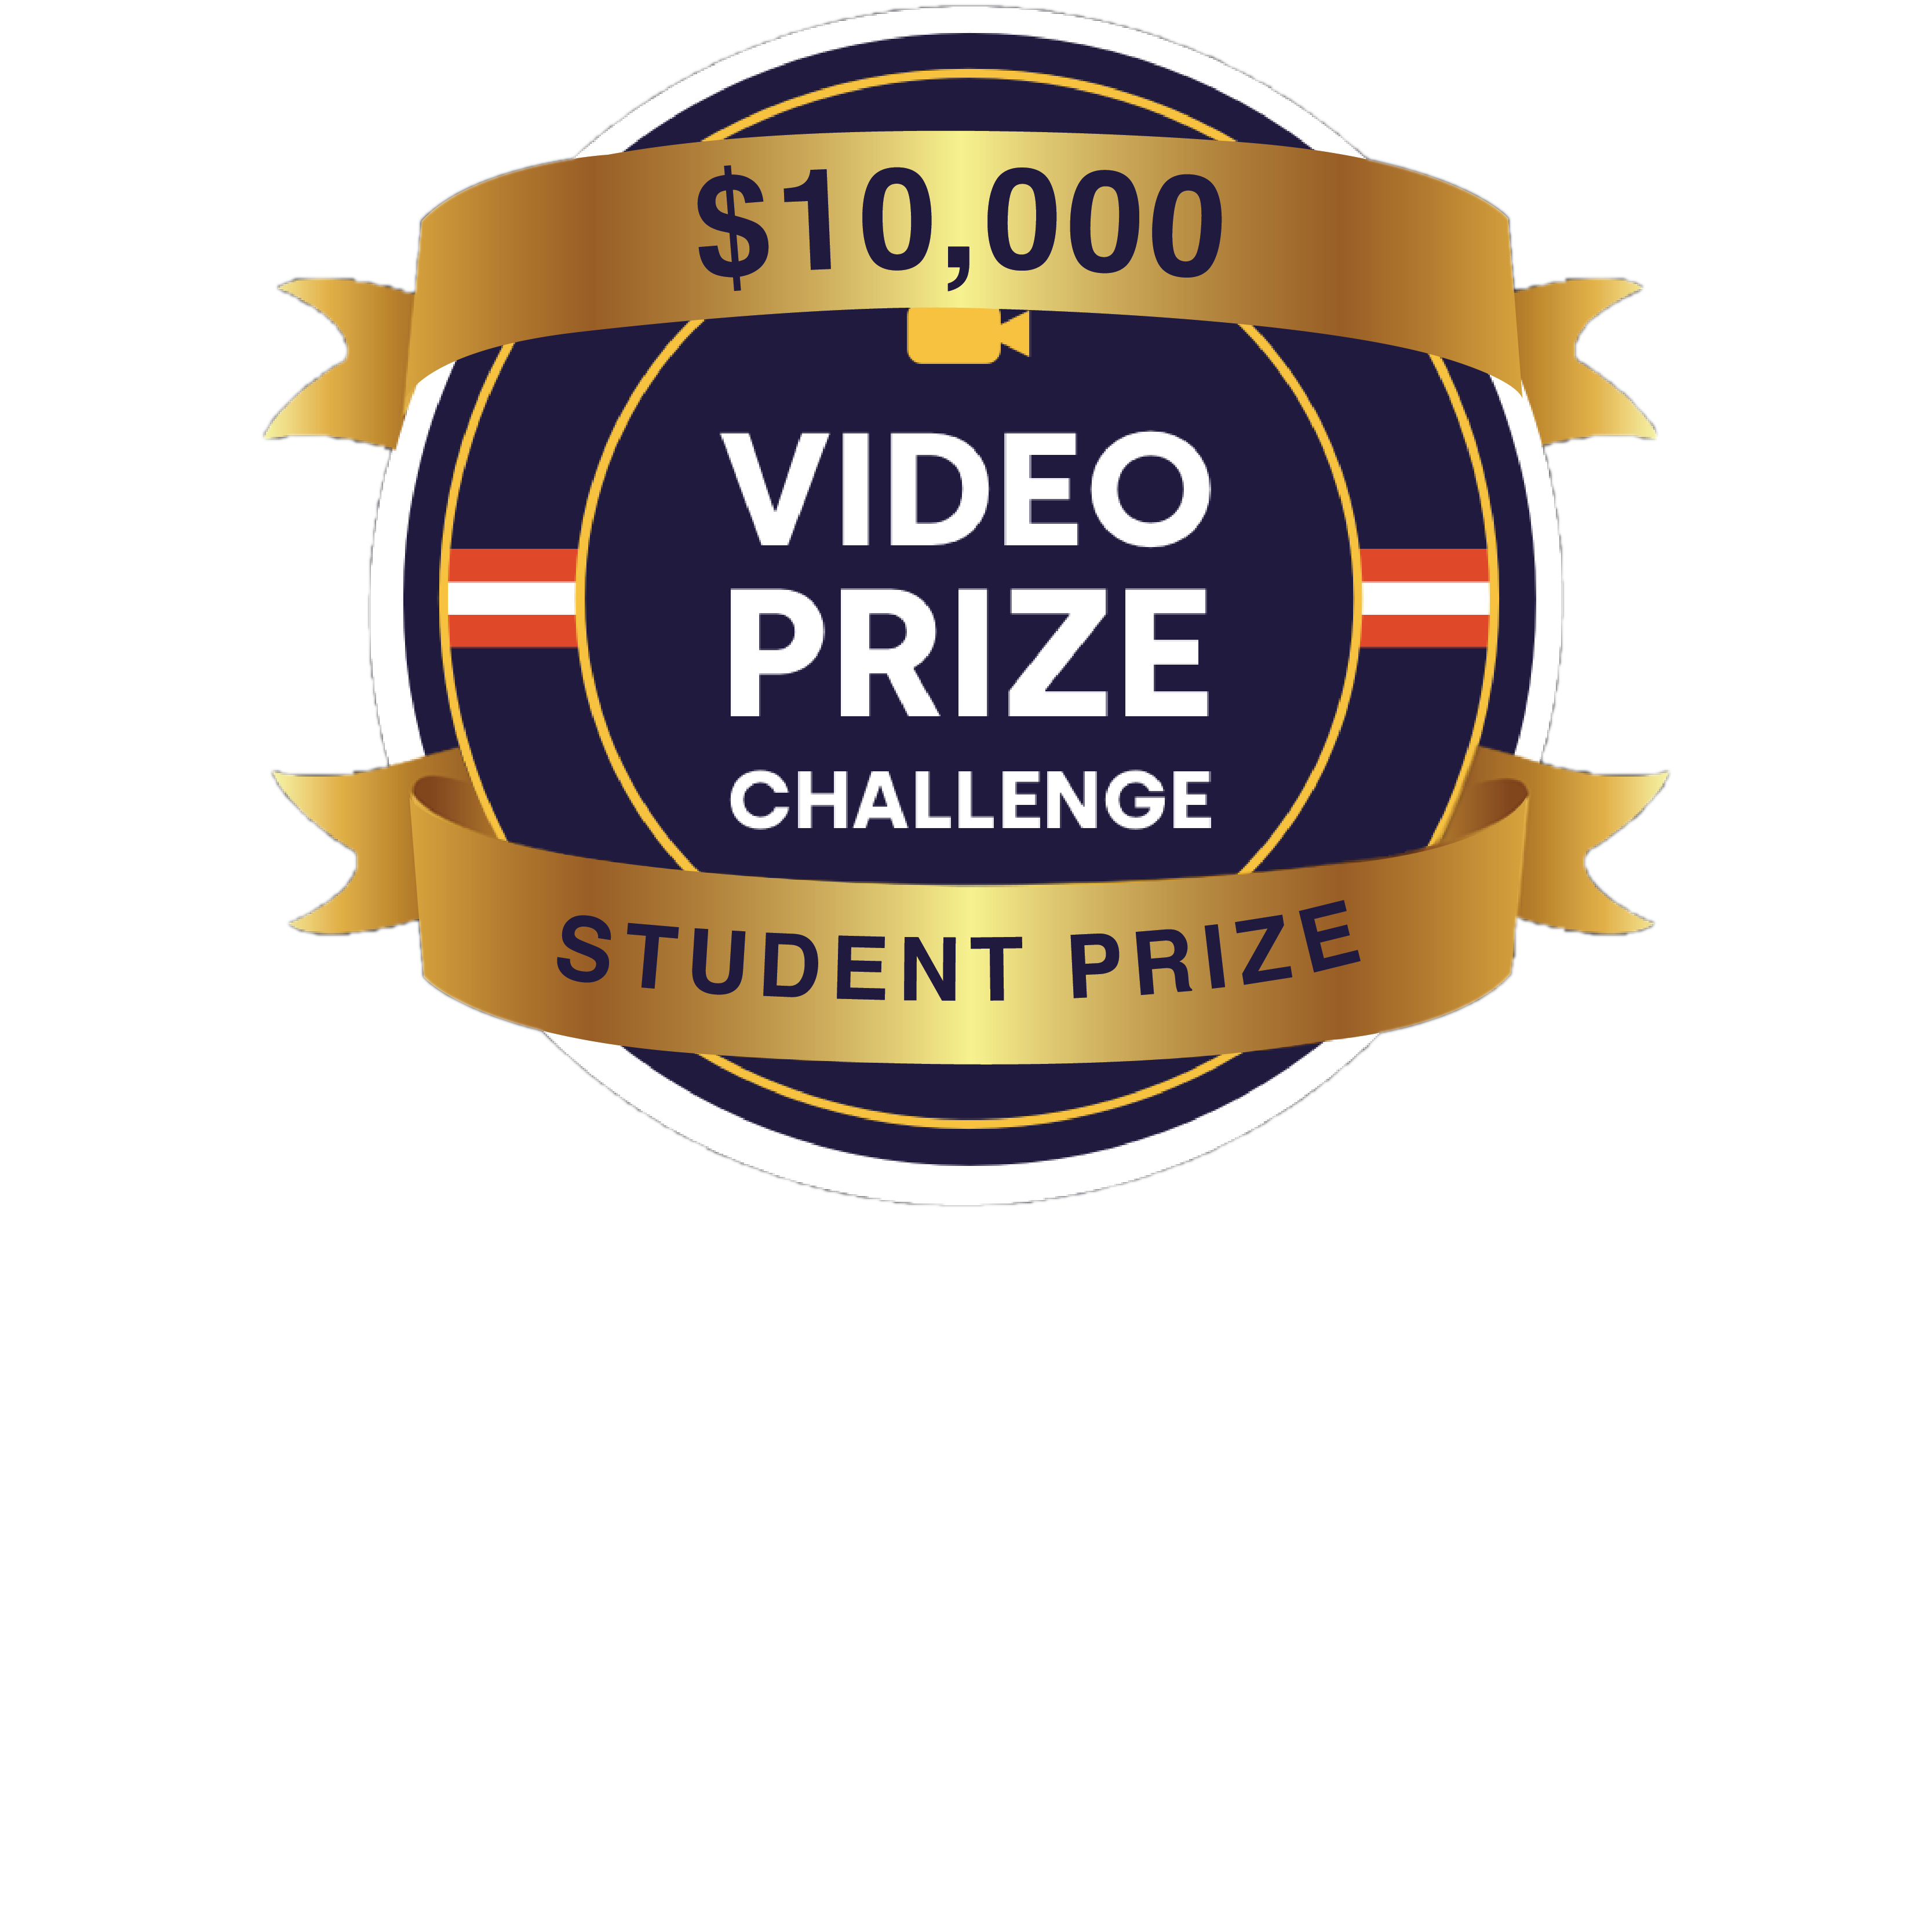 Video Prize Challenge logo overlaid with $10,000 Student Prize